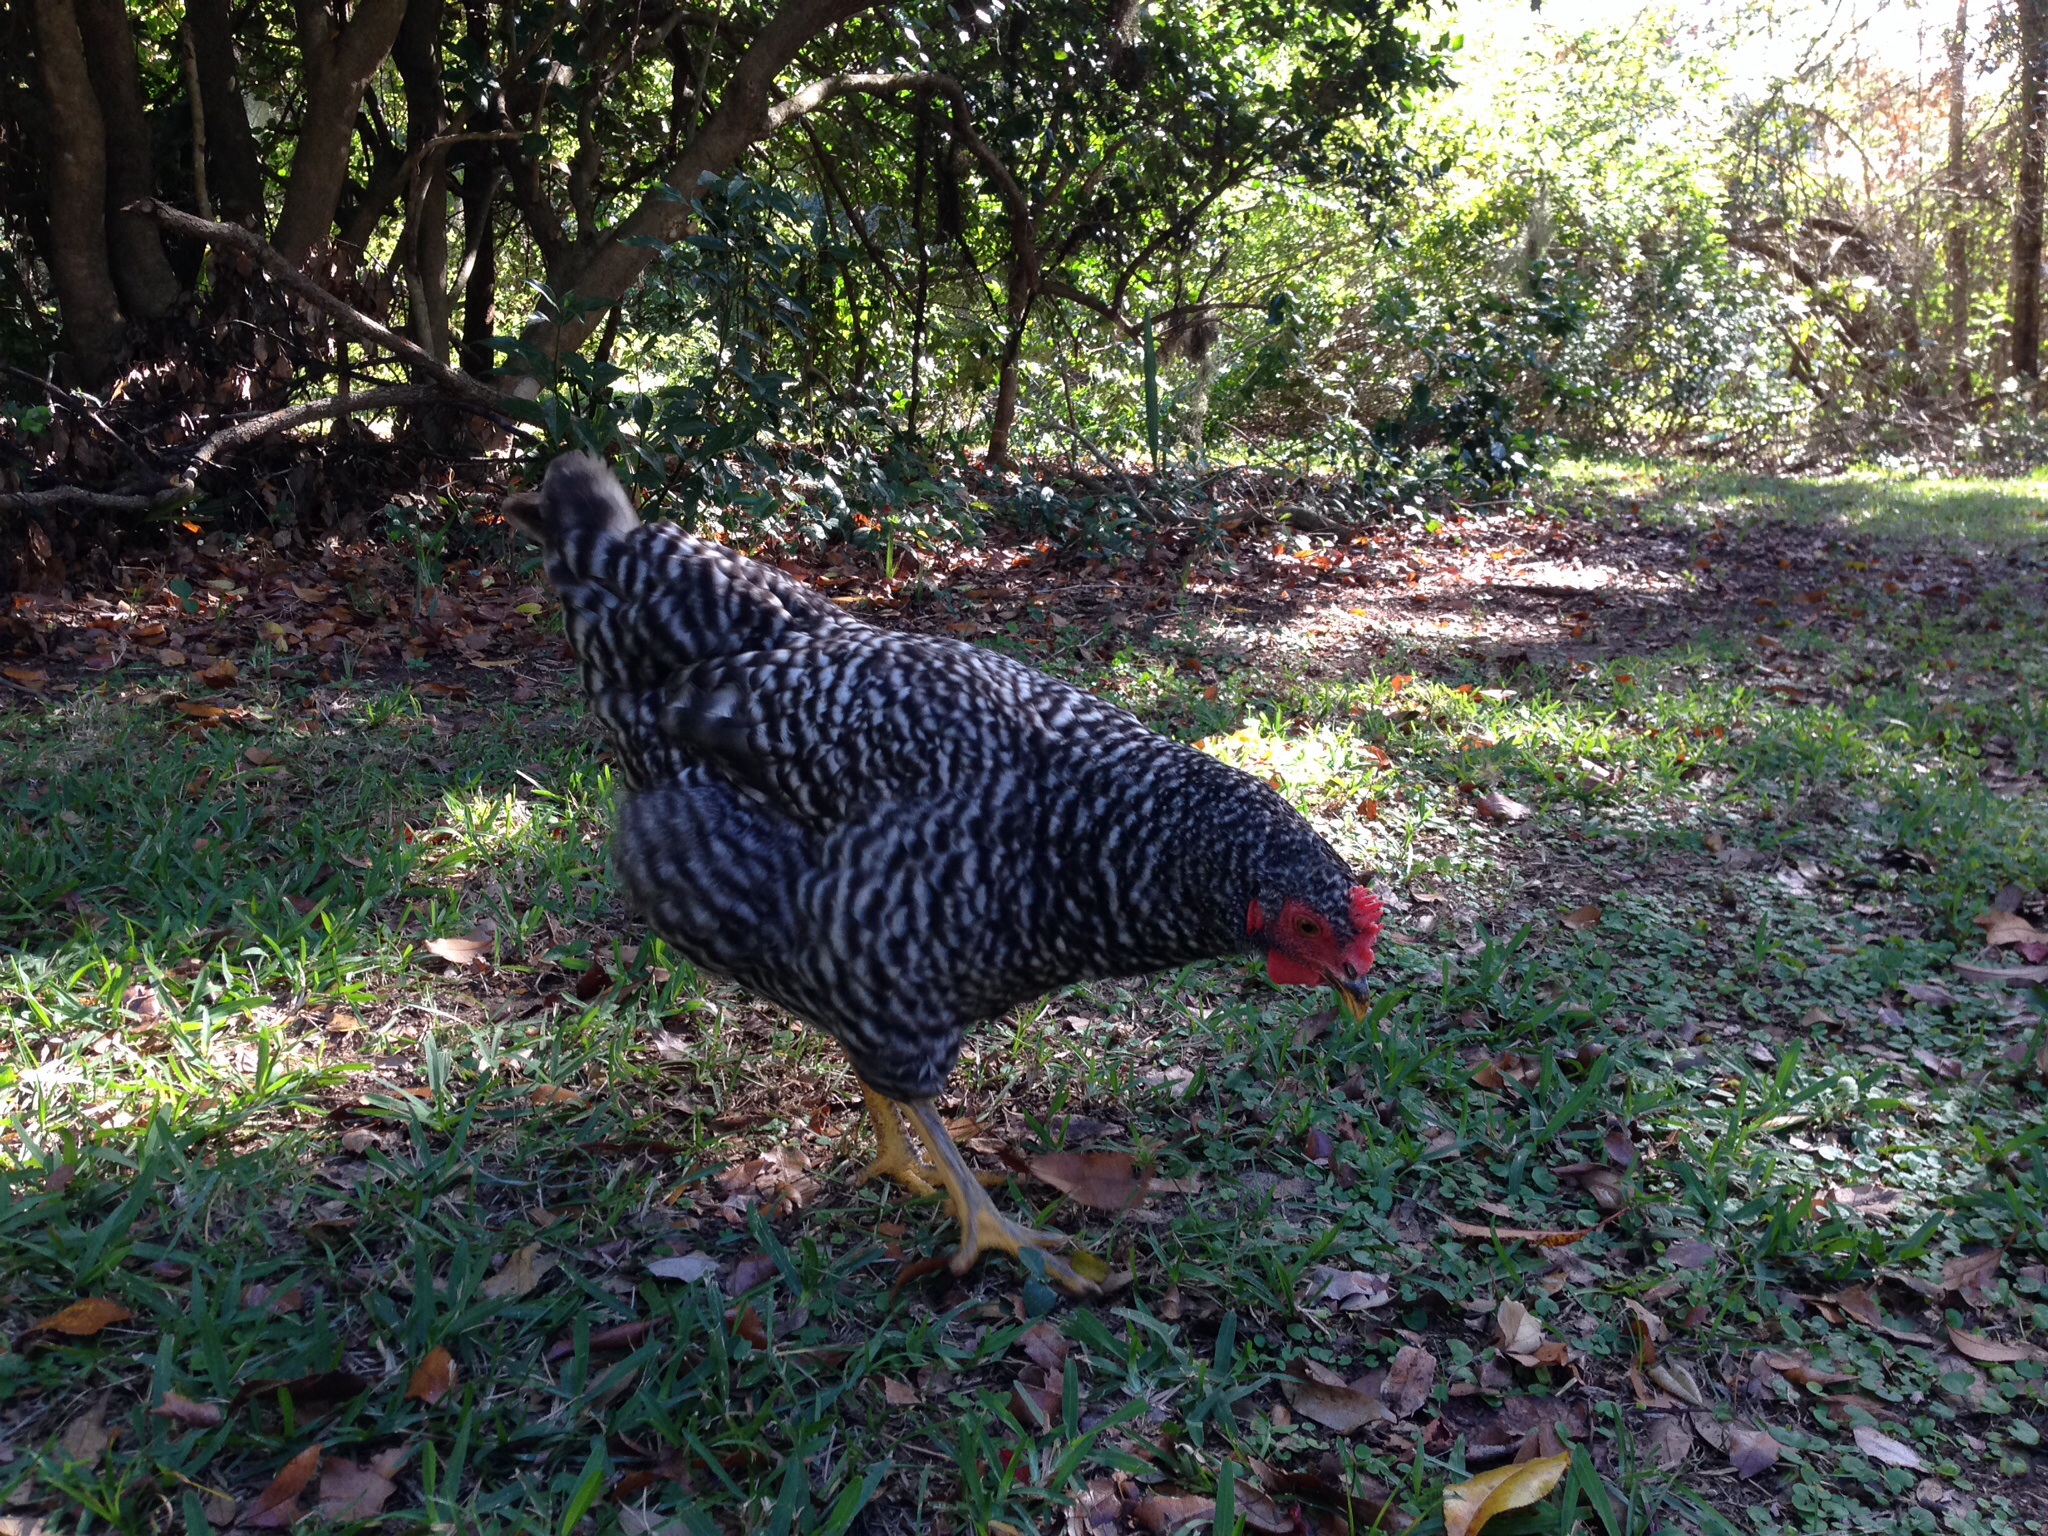 Georgia O'Keeffe, our Barred Plymouth Rock